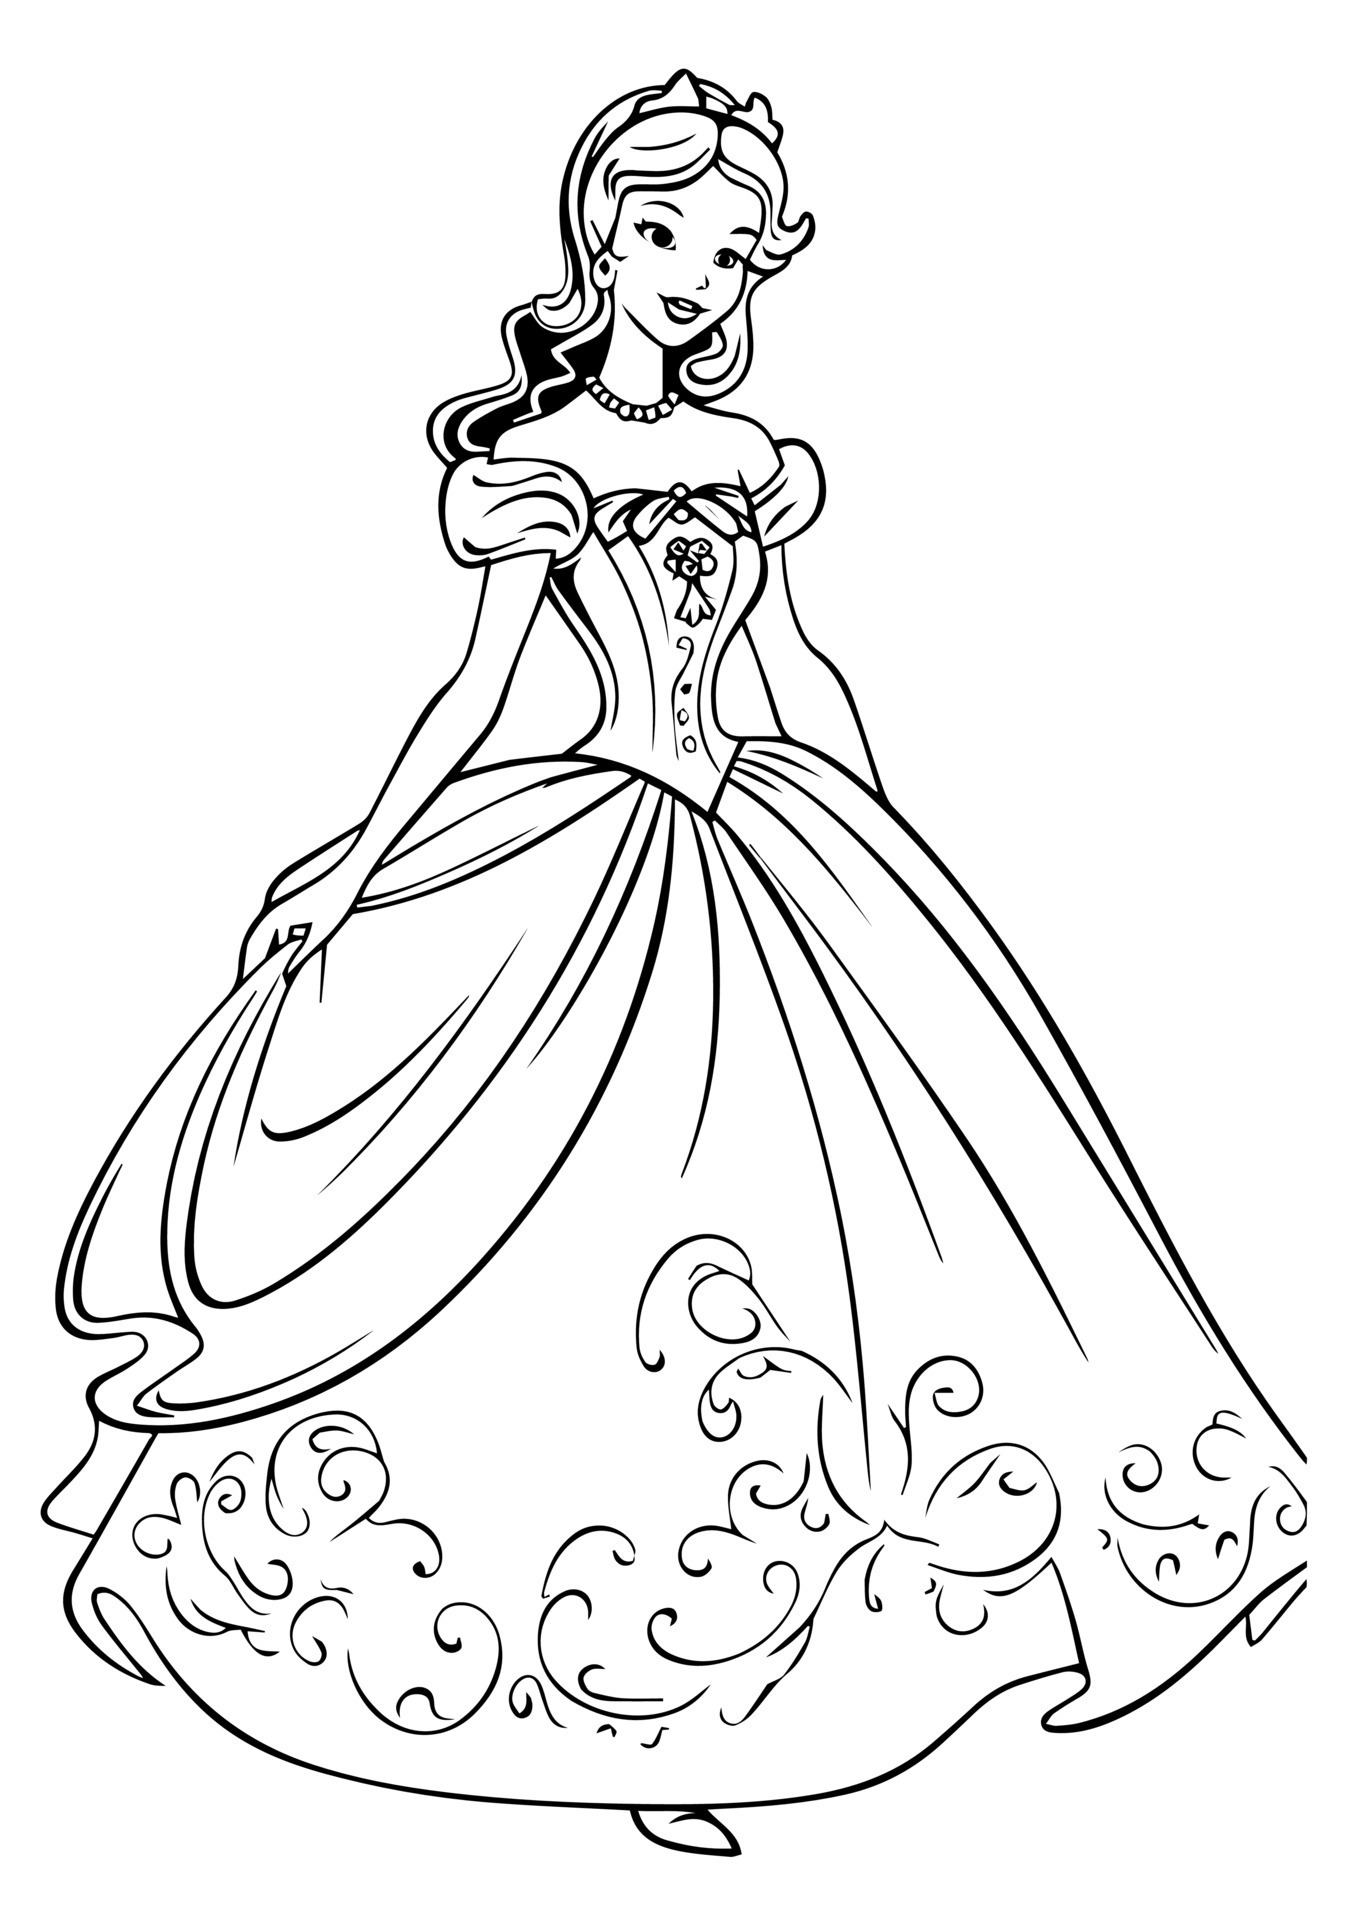 Princes coloring page black and white 23868322 Vector Art at Vecteezy